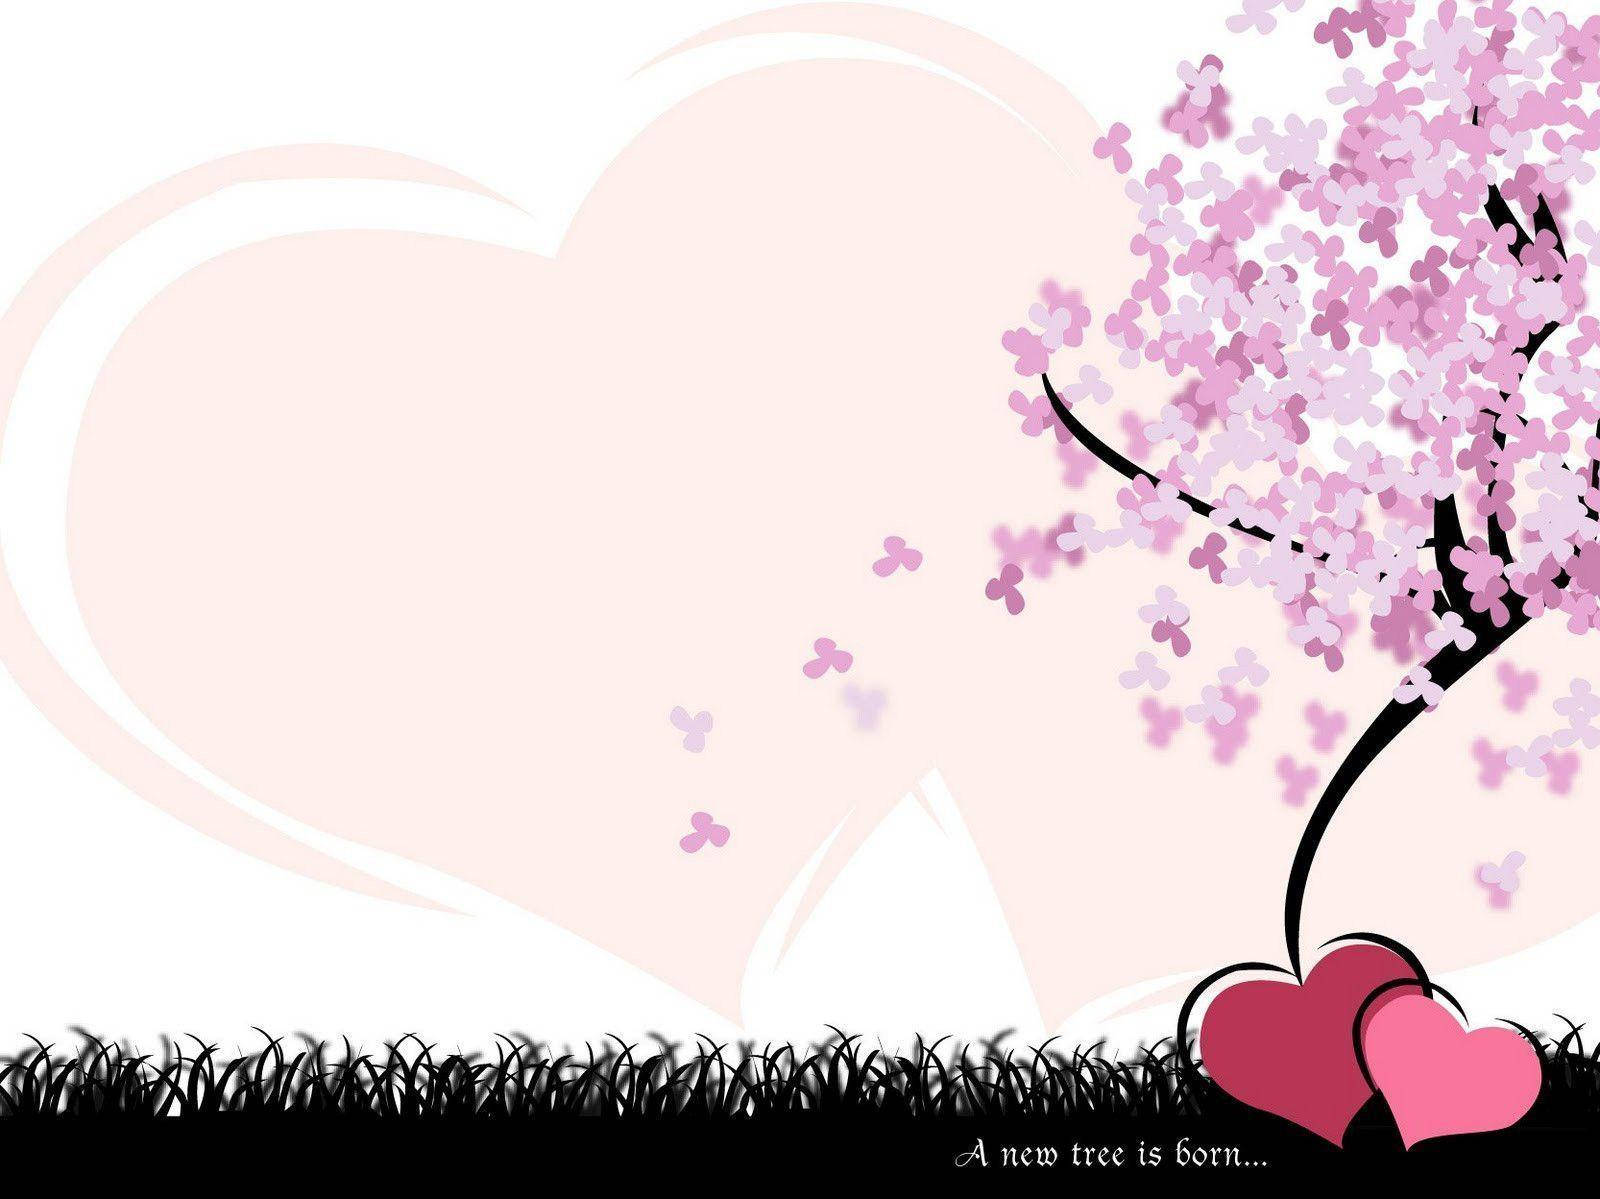 Free Cute Love Wallpaper Downloads, [100+] Cute Love Wallpapers for FREE |  